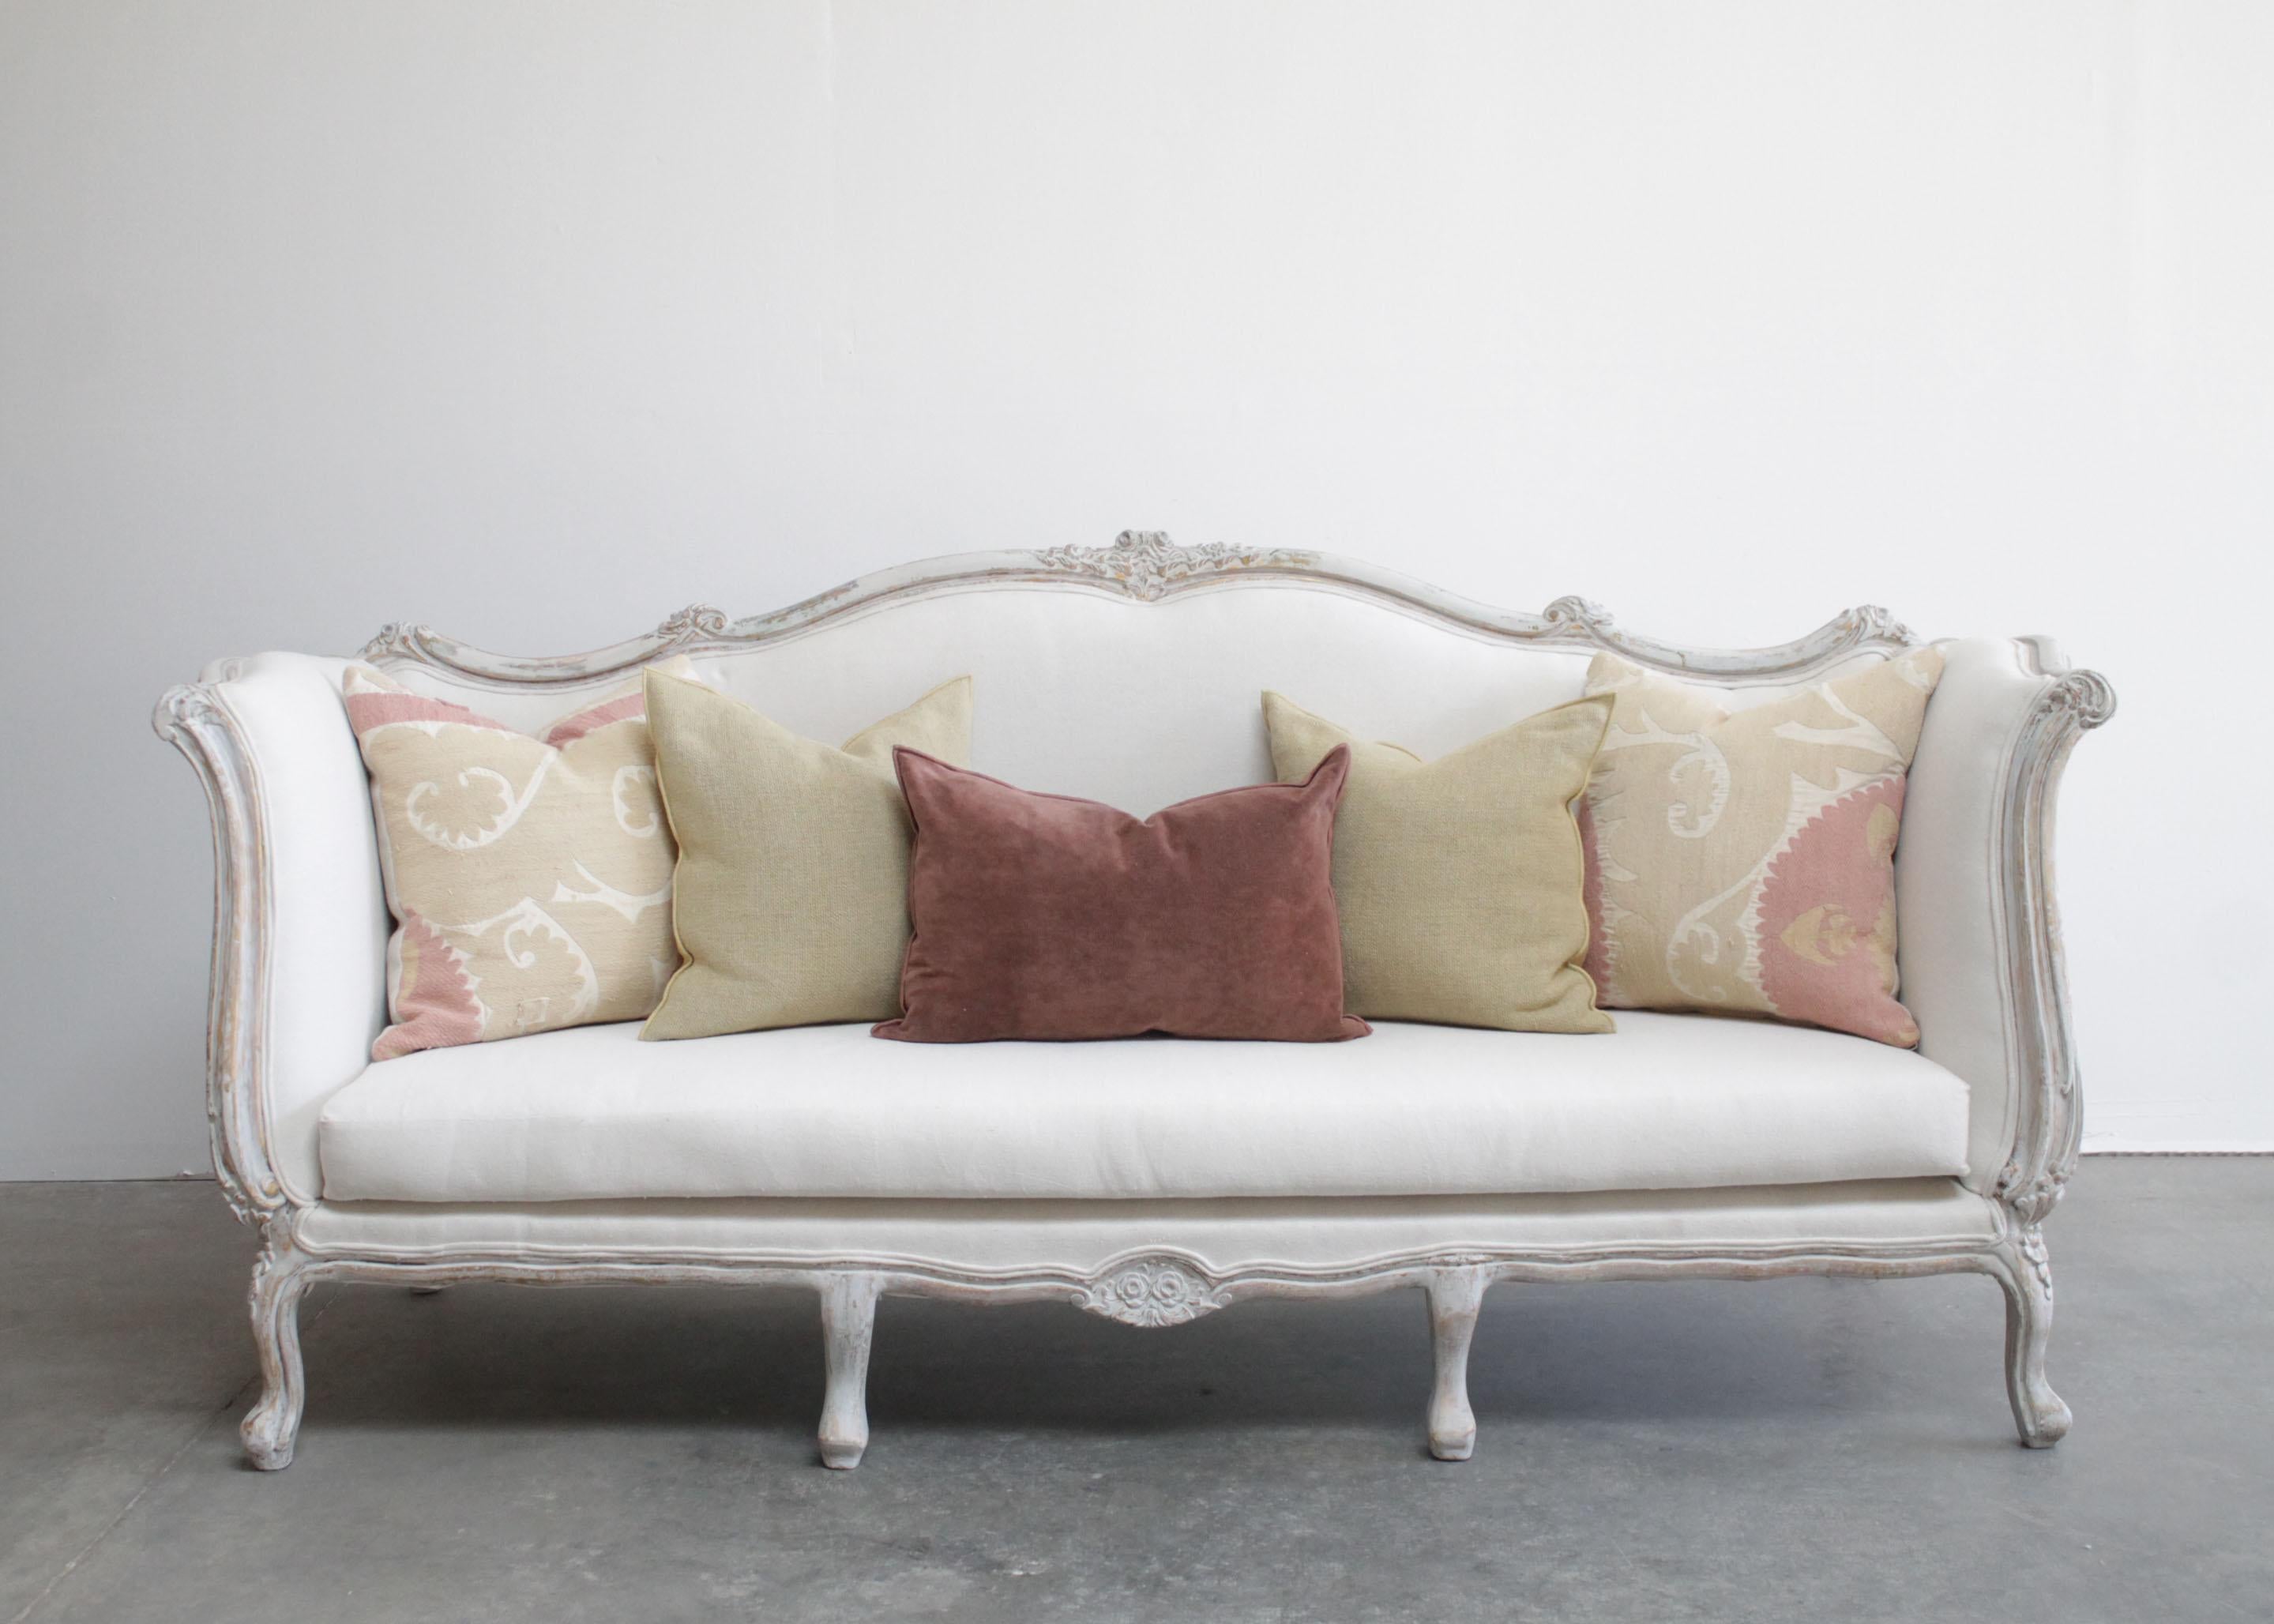 Vintage painted and upholstered Louis XV daybed style sofa
Painted in a French gray with subtle distressed edges, where gilt and wood show through.
Classic cabriole legs, with a floral carvings, and large rose and flower garland on the center